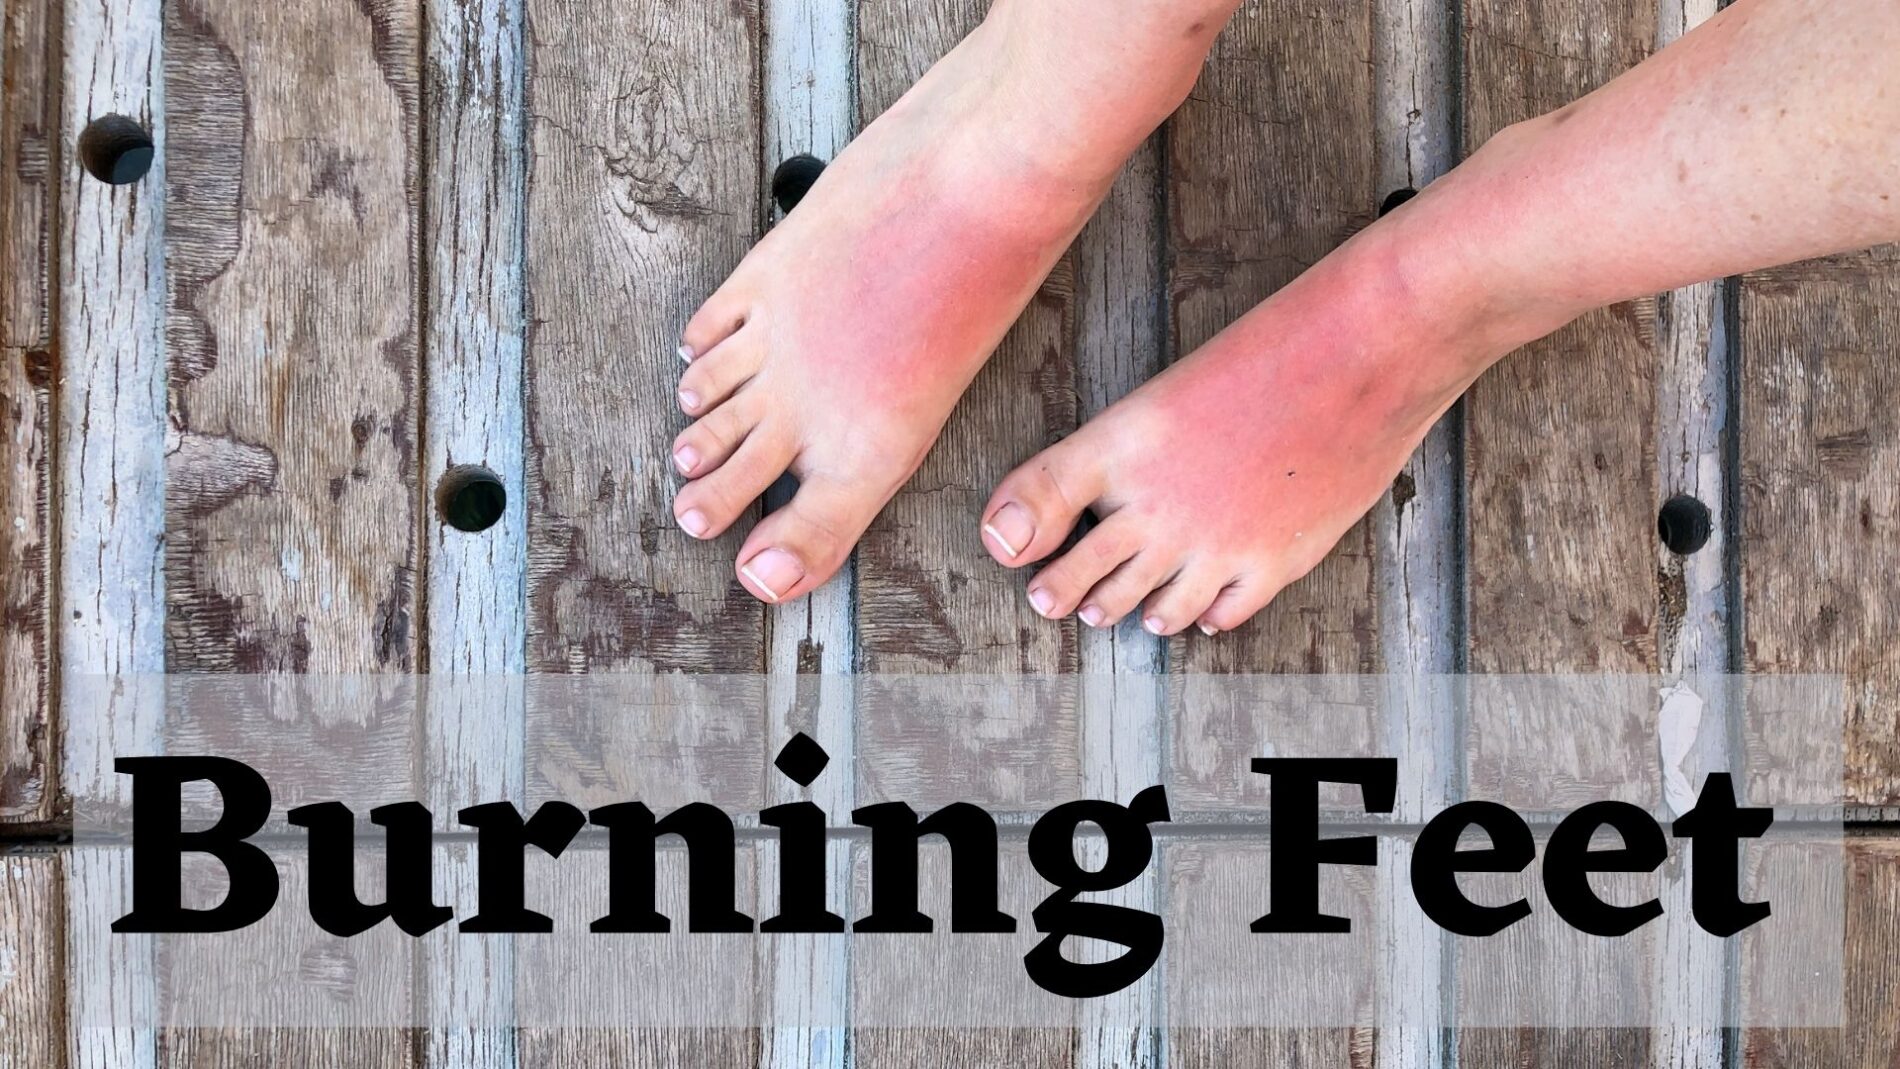 Burning Feet Know its Symptoms, Causes and Home Remedies